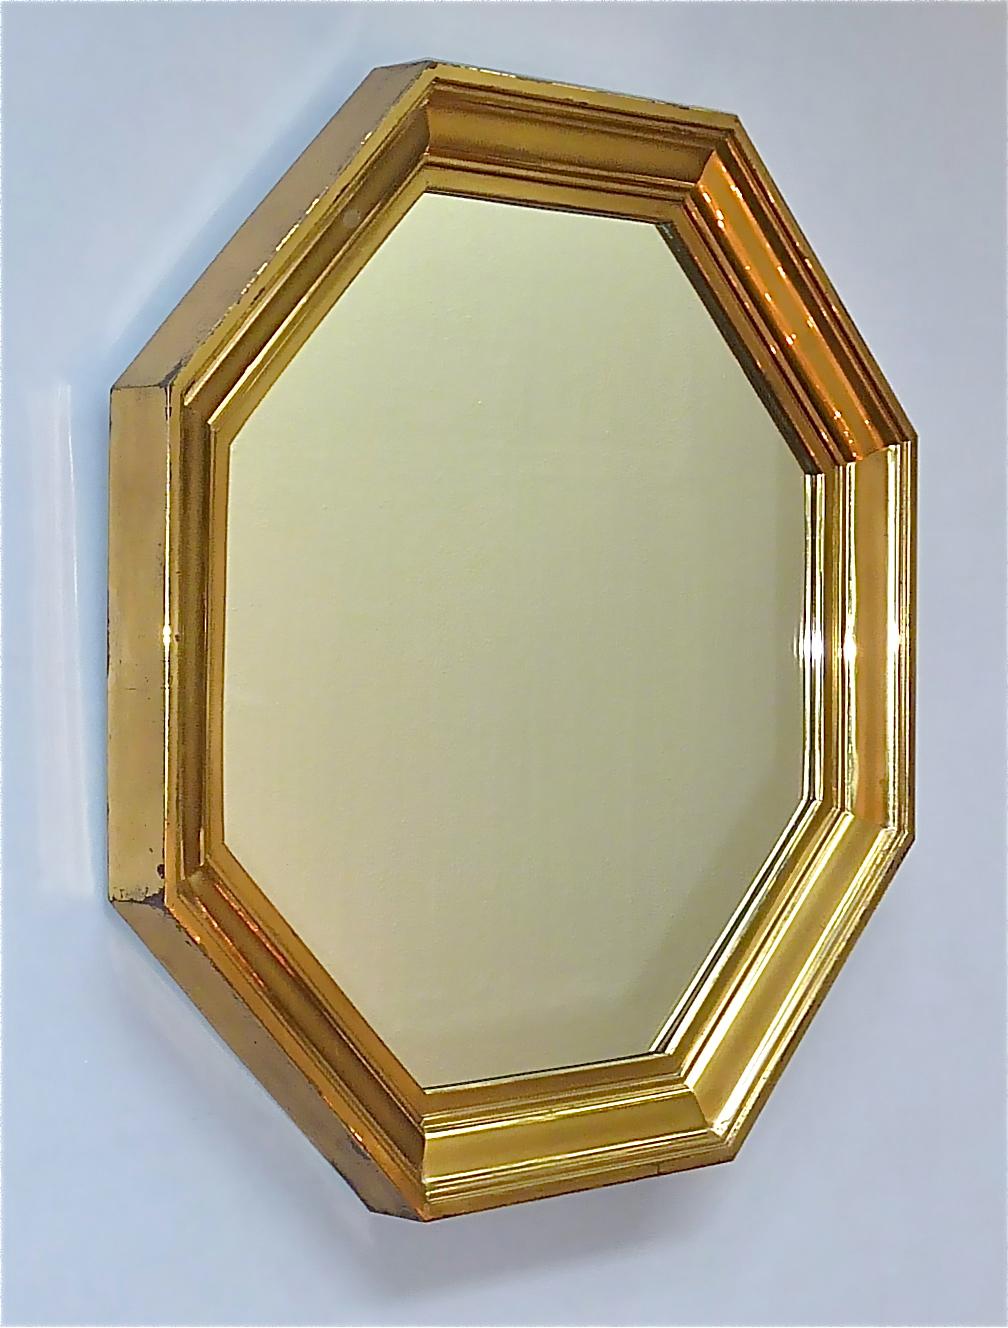 Fantastic large octagonal Maison Jansen mirror, France, around 1970s. Probably designed by Sandro Petti or Guy Lefevre the beautiful mirror has an octagonal shape made of a stepped patinated brass frame with mirror glass on a wood base. The high